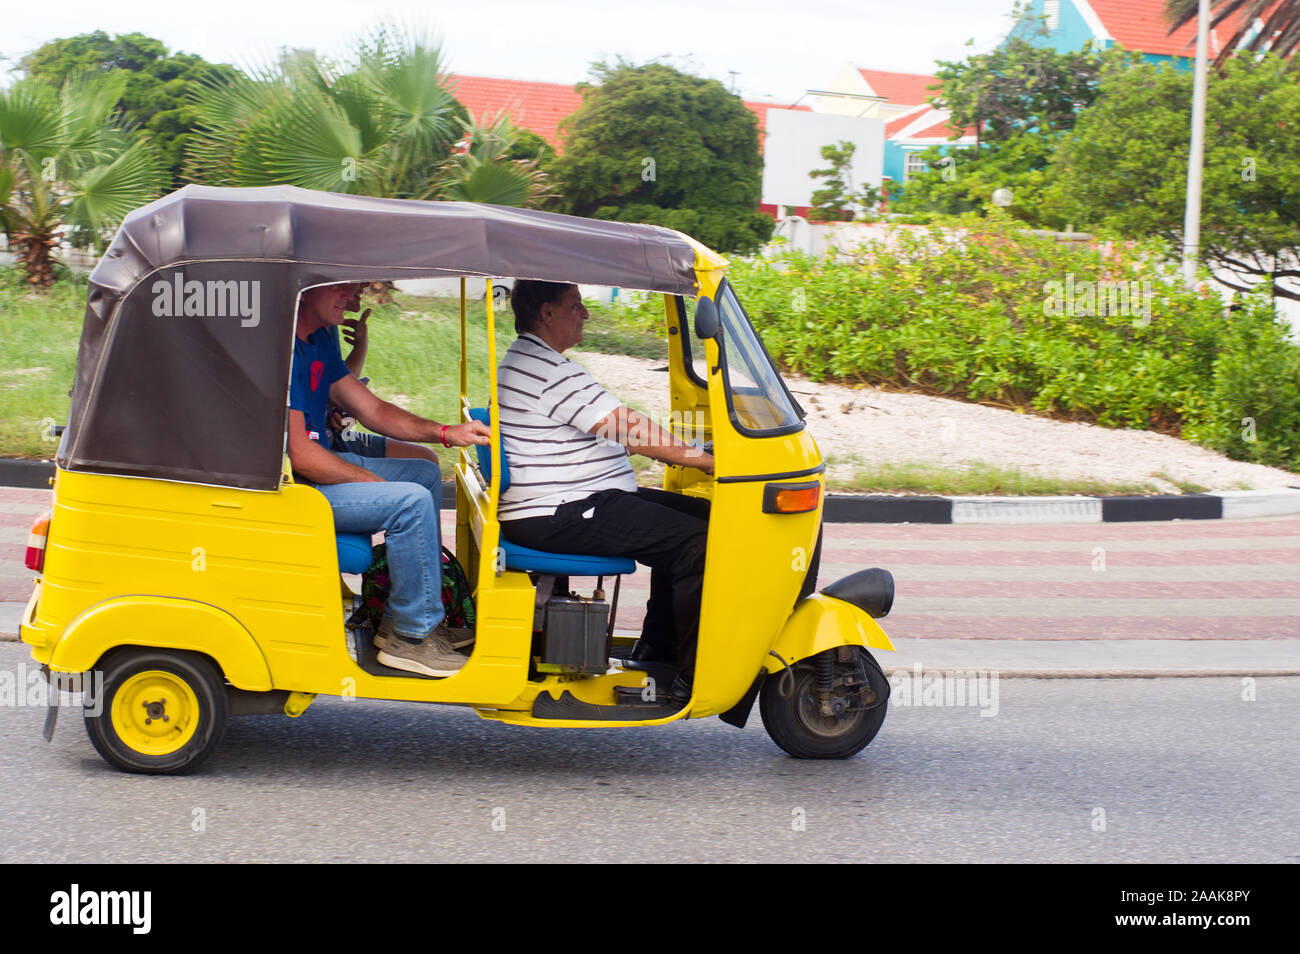 Willemstad, Curacao - October 23, 2019: Tuk tuk, a traditional tricycle taxi on the streets of Willemstad, Curacao acao Stock Photo